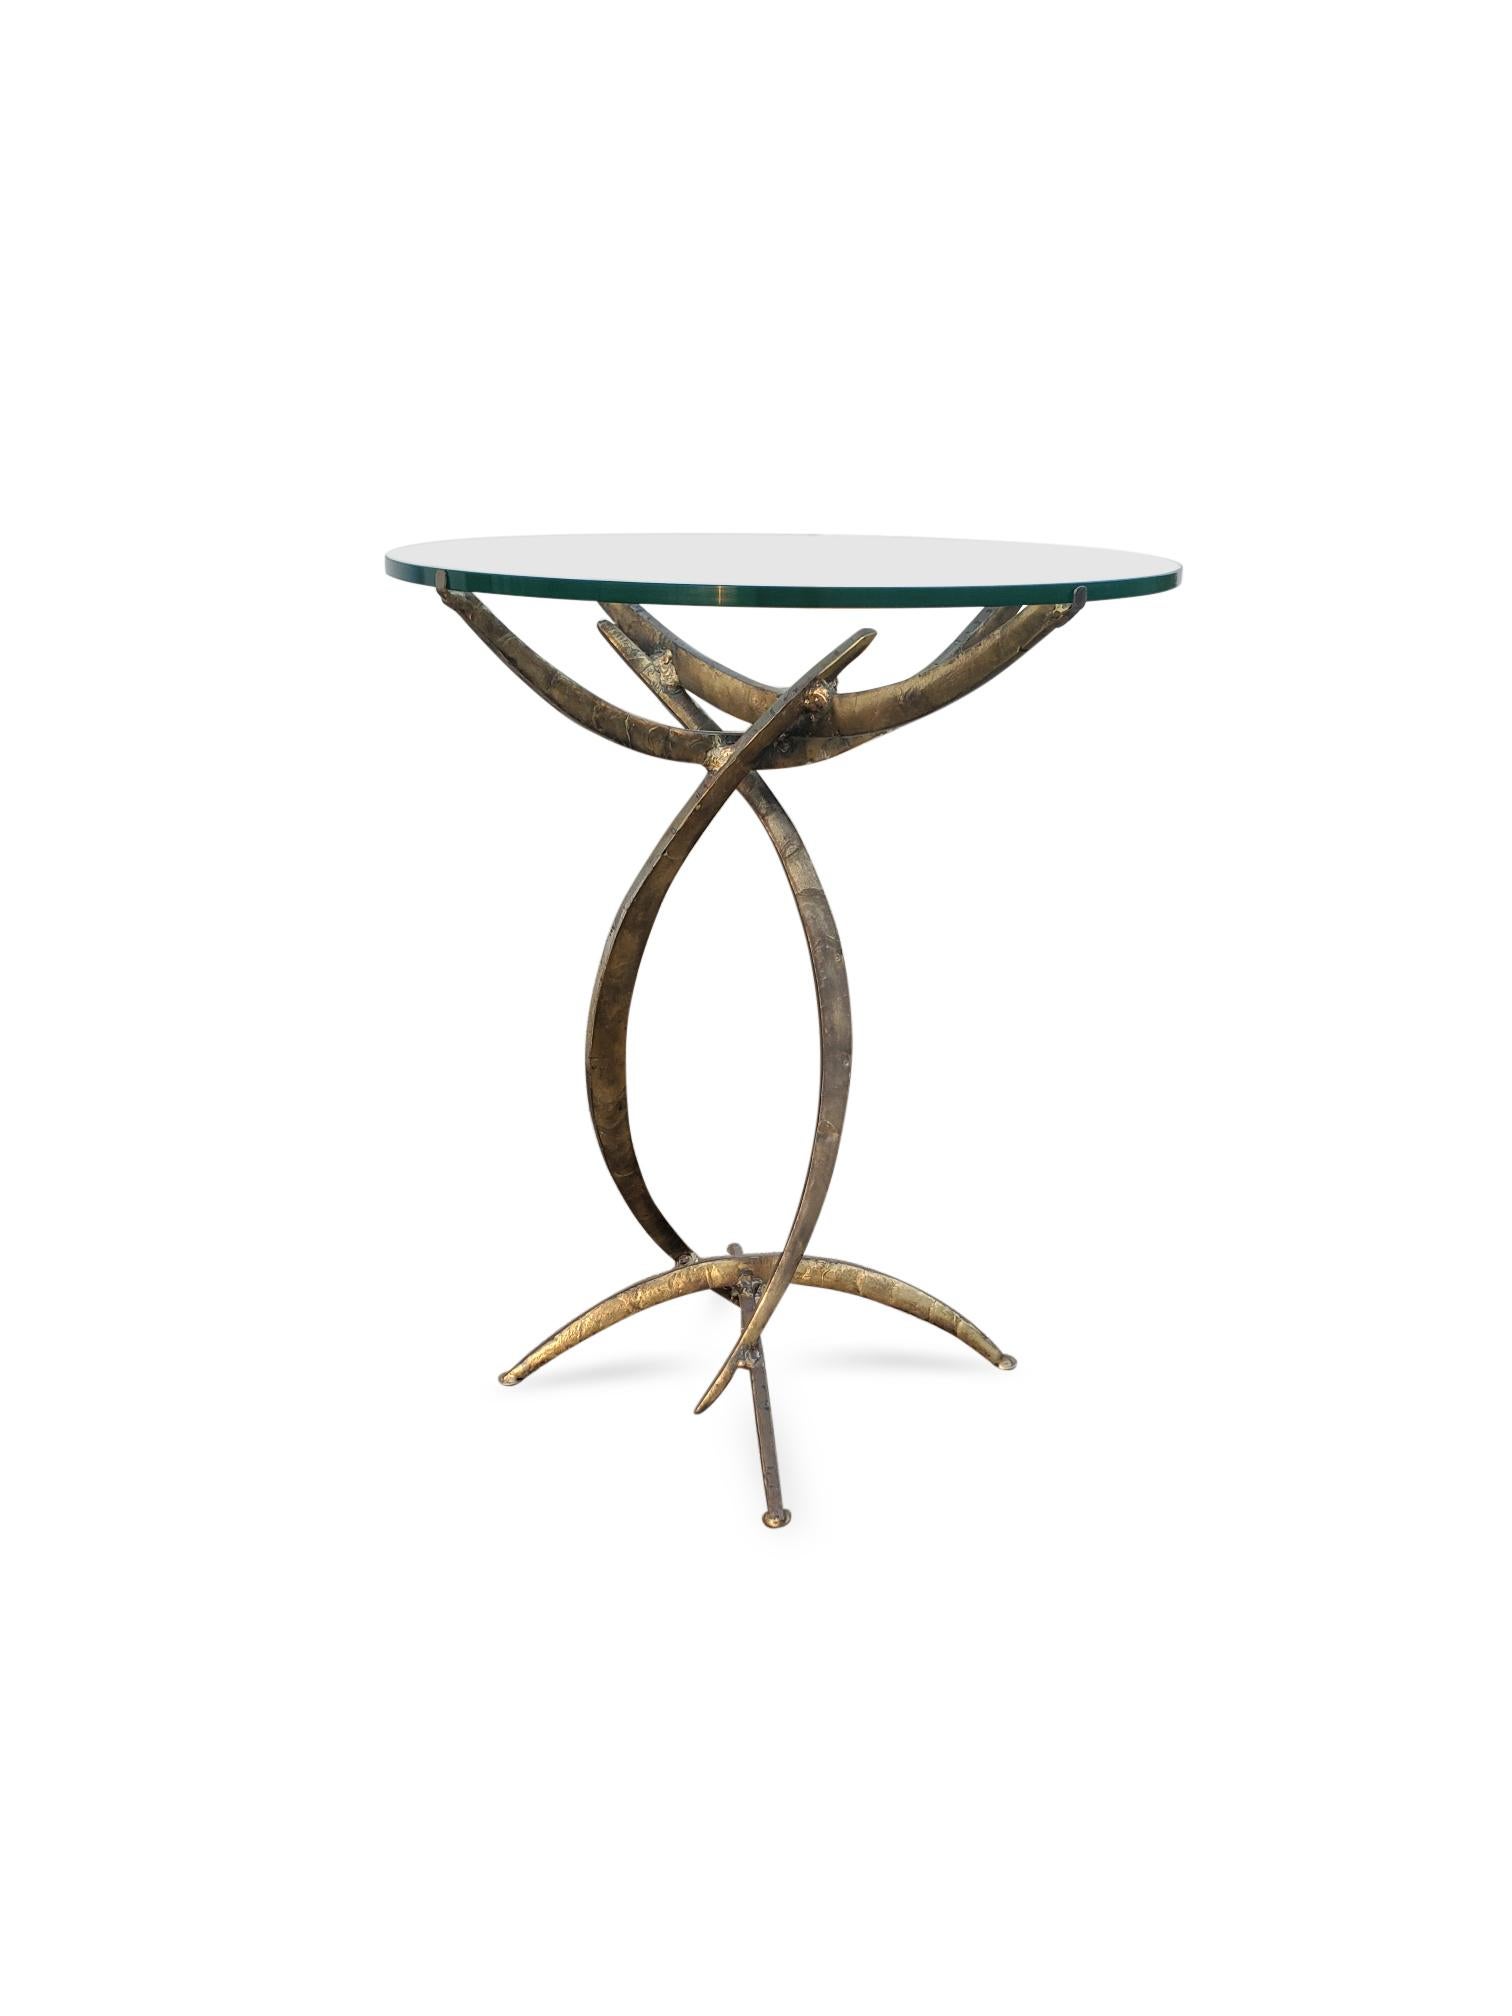 20th Century Signed Silas Seandel ' Ortago ' Bronze Side Table  For Sale